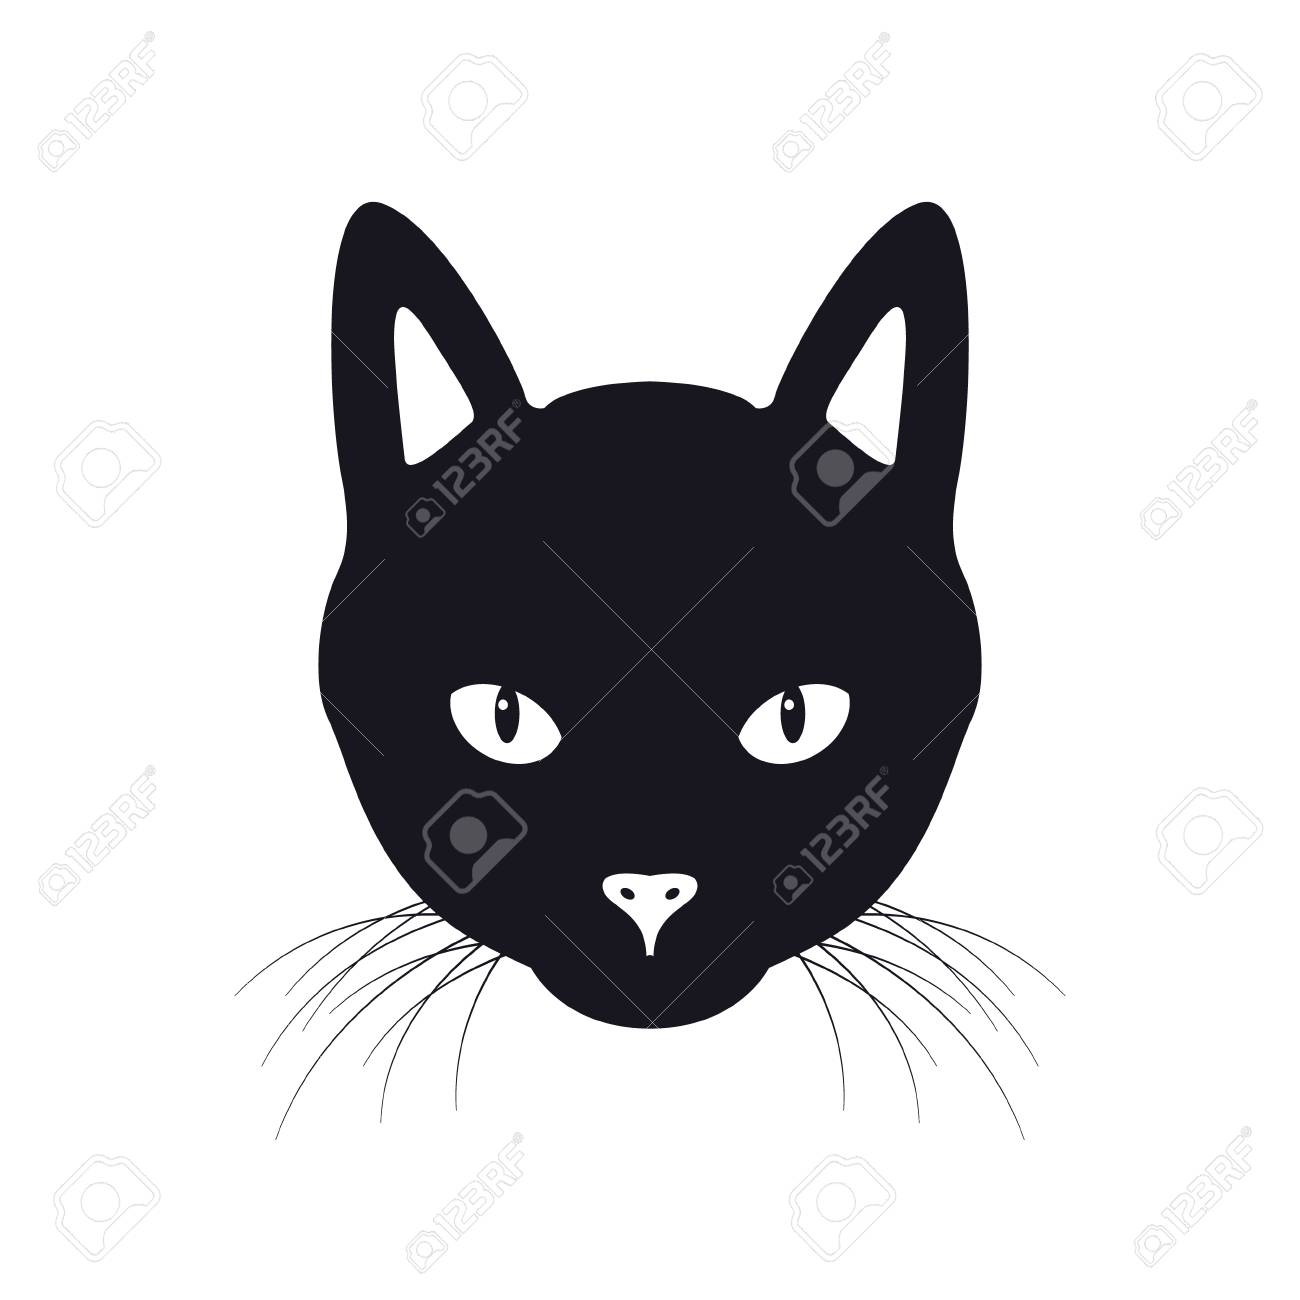 The Black Cat Face Vector Illustration Isolated On A White